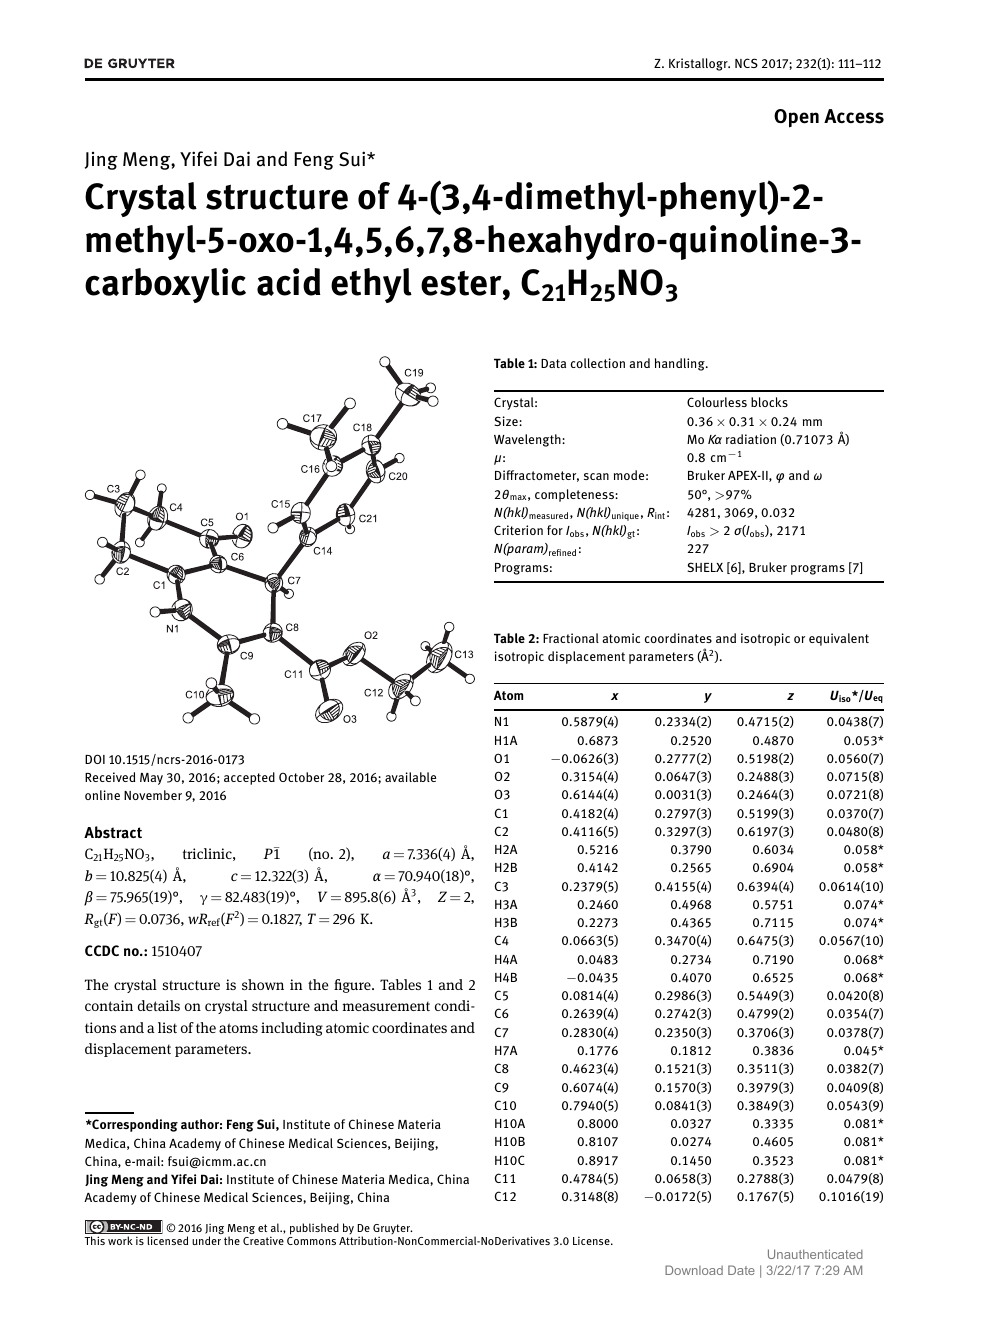 Crystal Structure Of 4 3 4 Dimethyl Phenyl 2 Methyl 5 Oxo 1 4 5 6 7 8 Hexahydro Quinoline 3 Carboxylic Acid Ethyl Ester C21h25no3 Topic Of Research Paper In Materials Engineering Download Scholarly Article Pdf And Read For Free On Cyberleninka